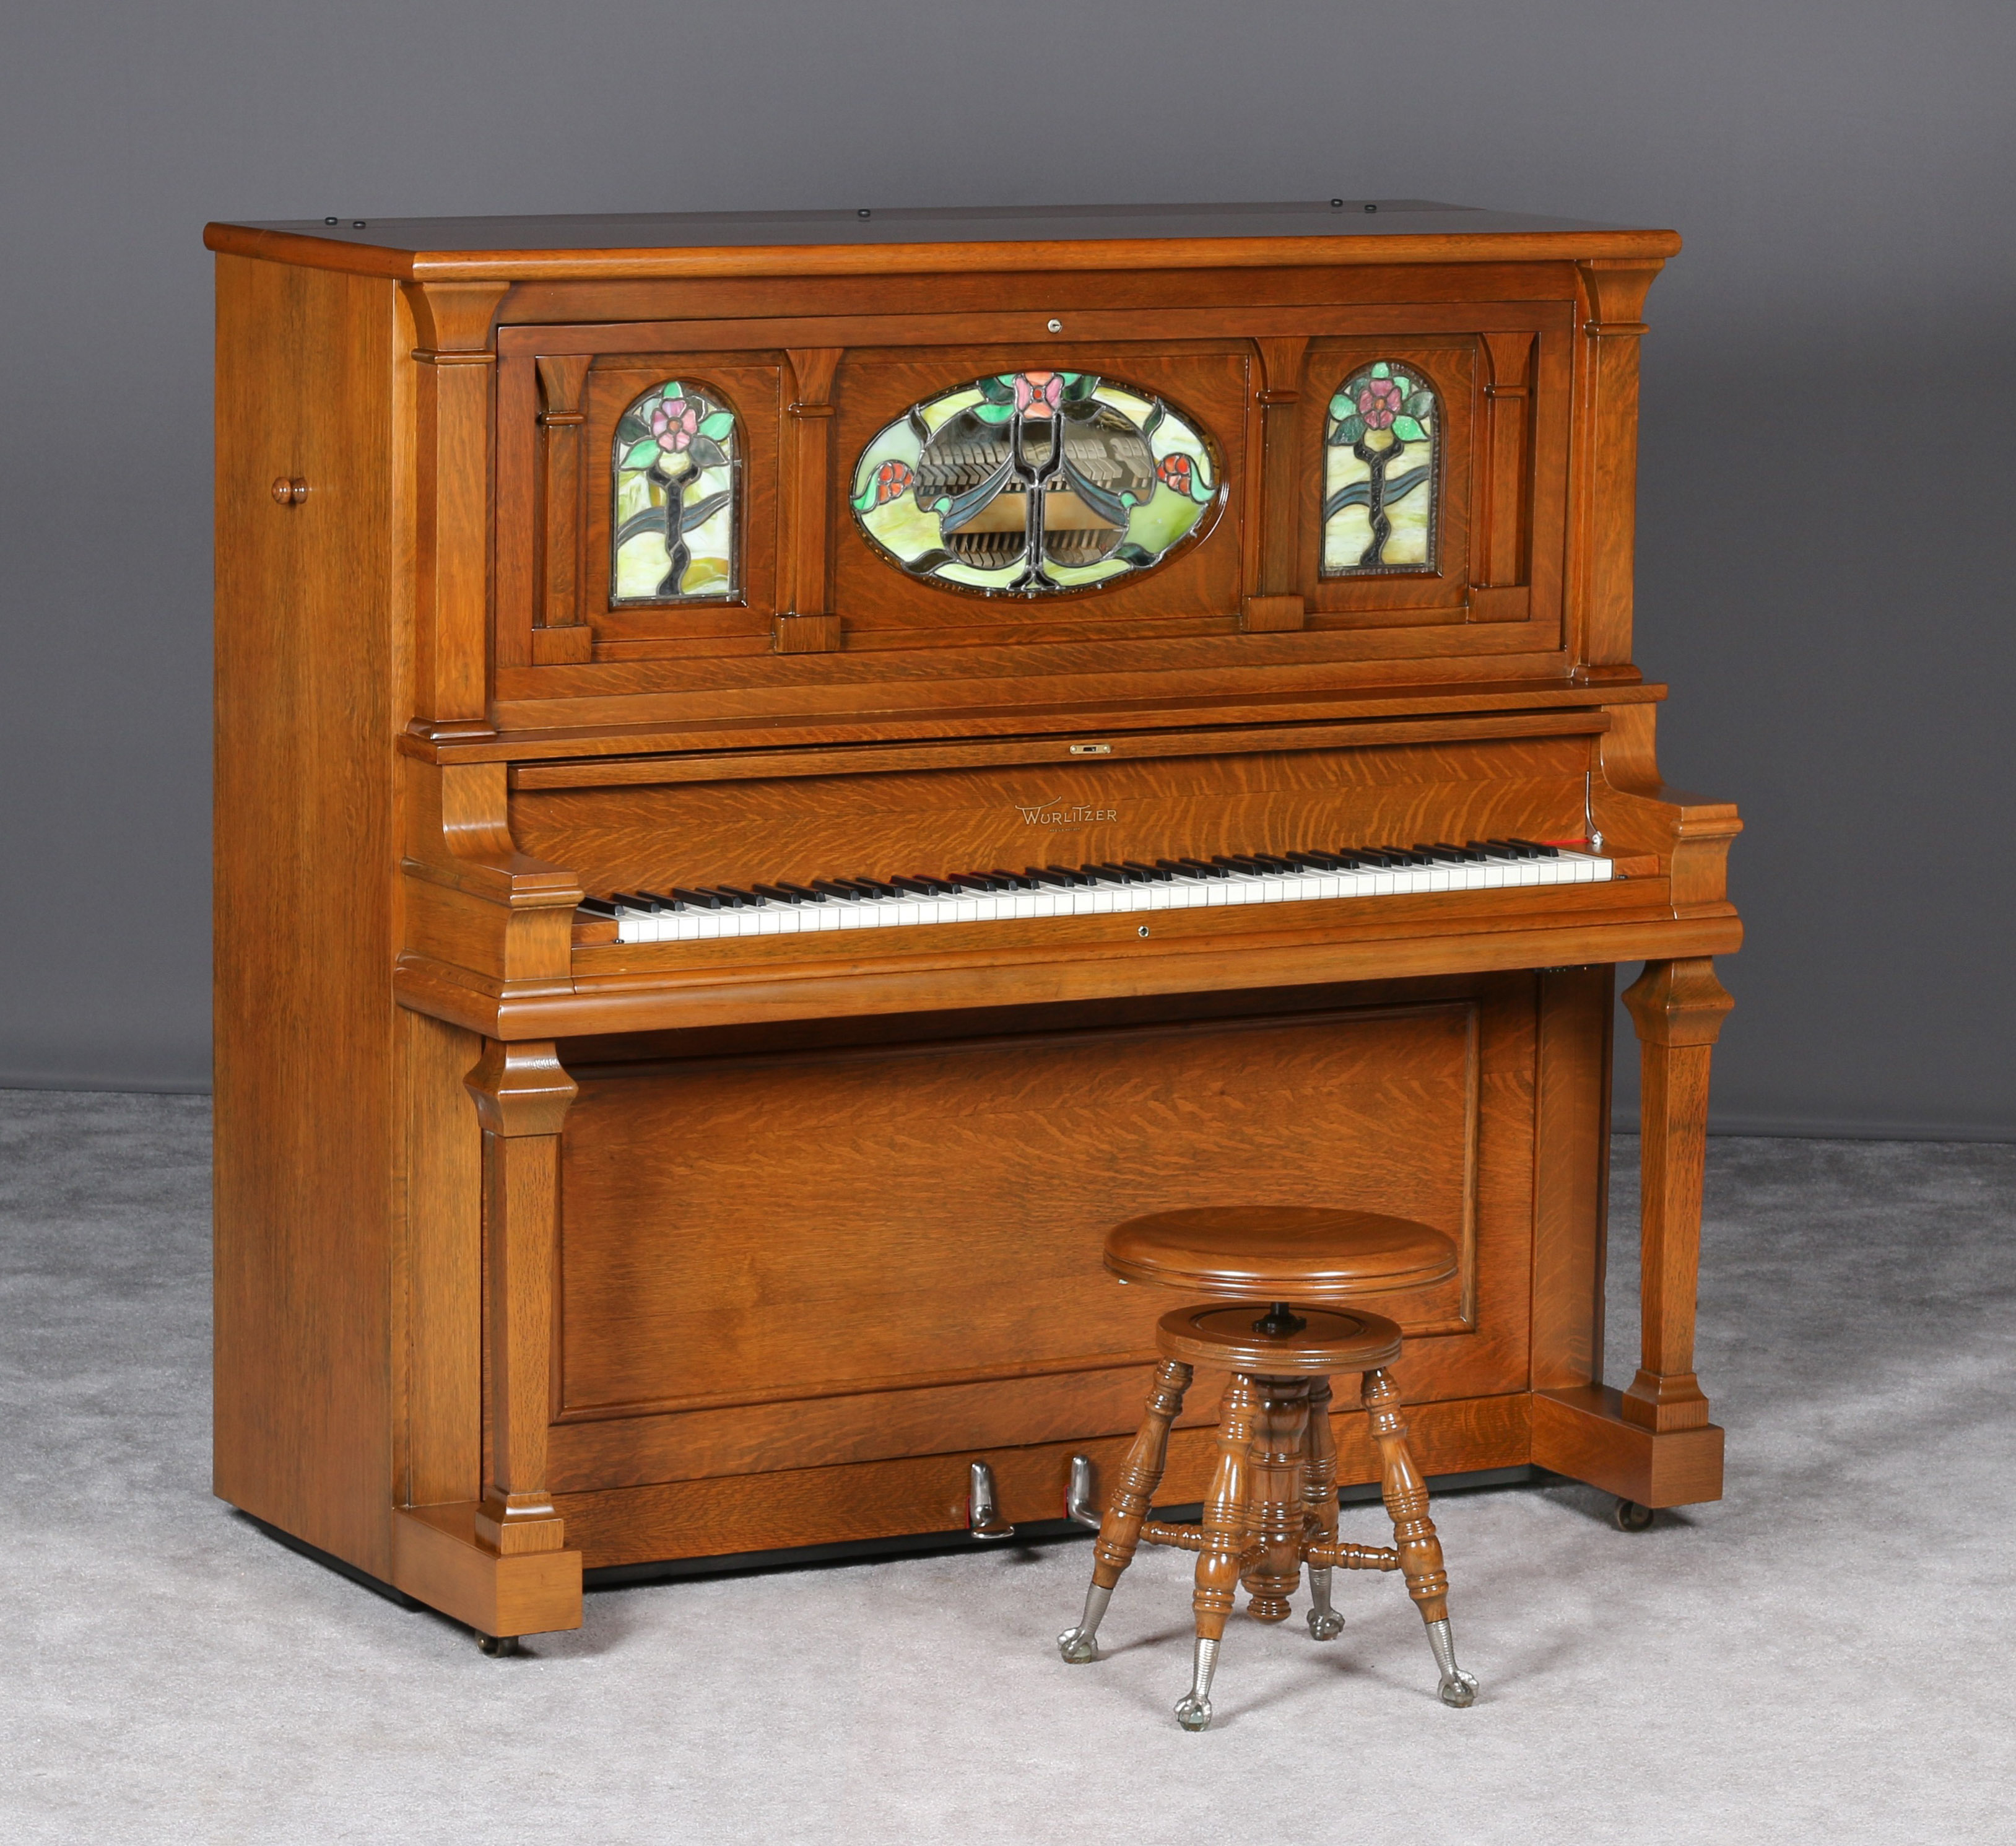 oak player piano with 2 windows on top